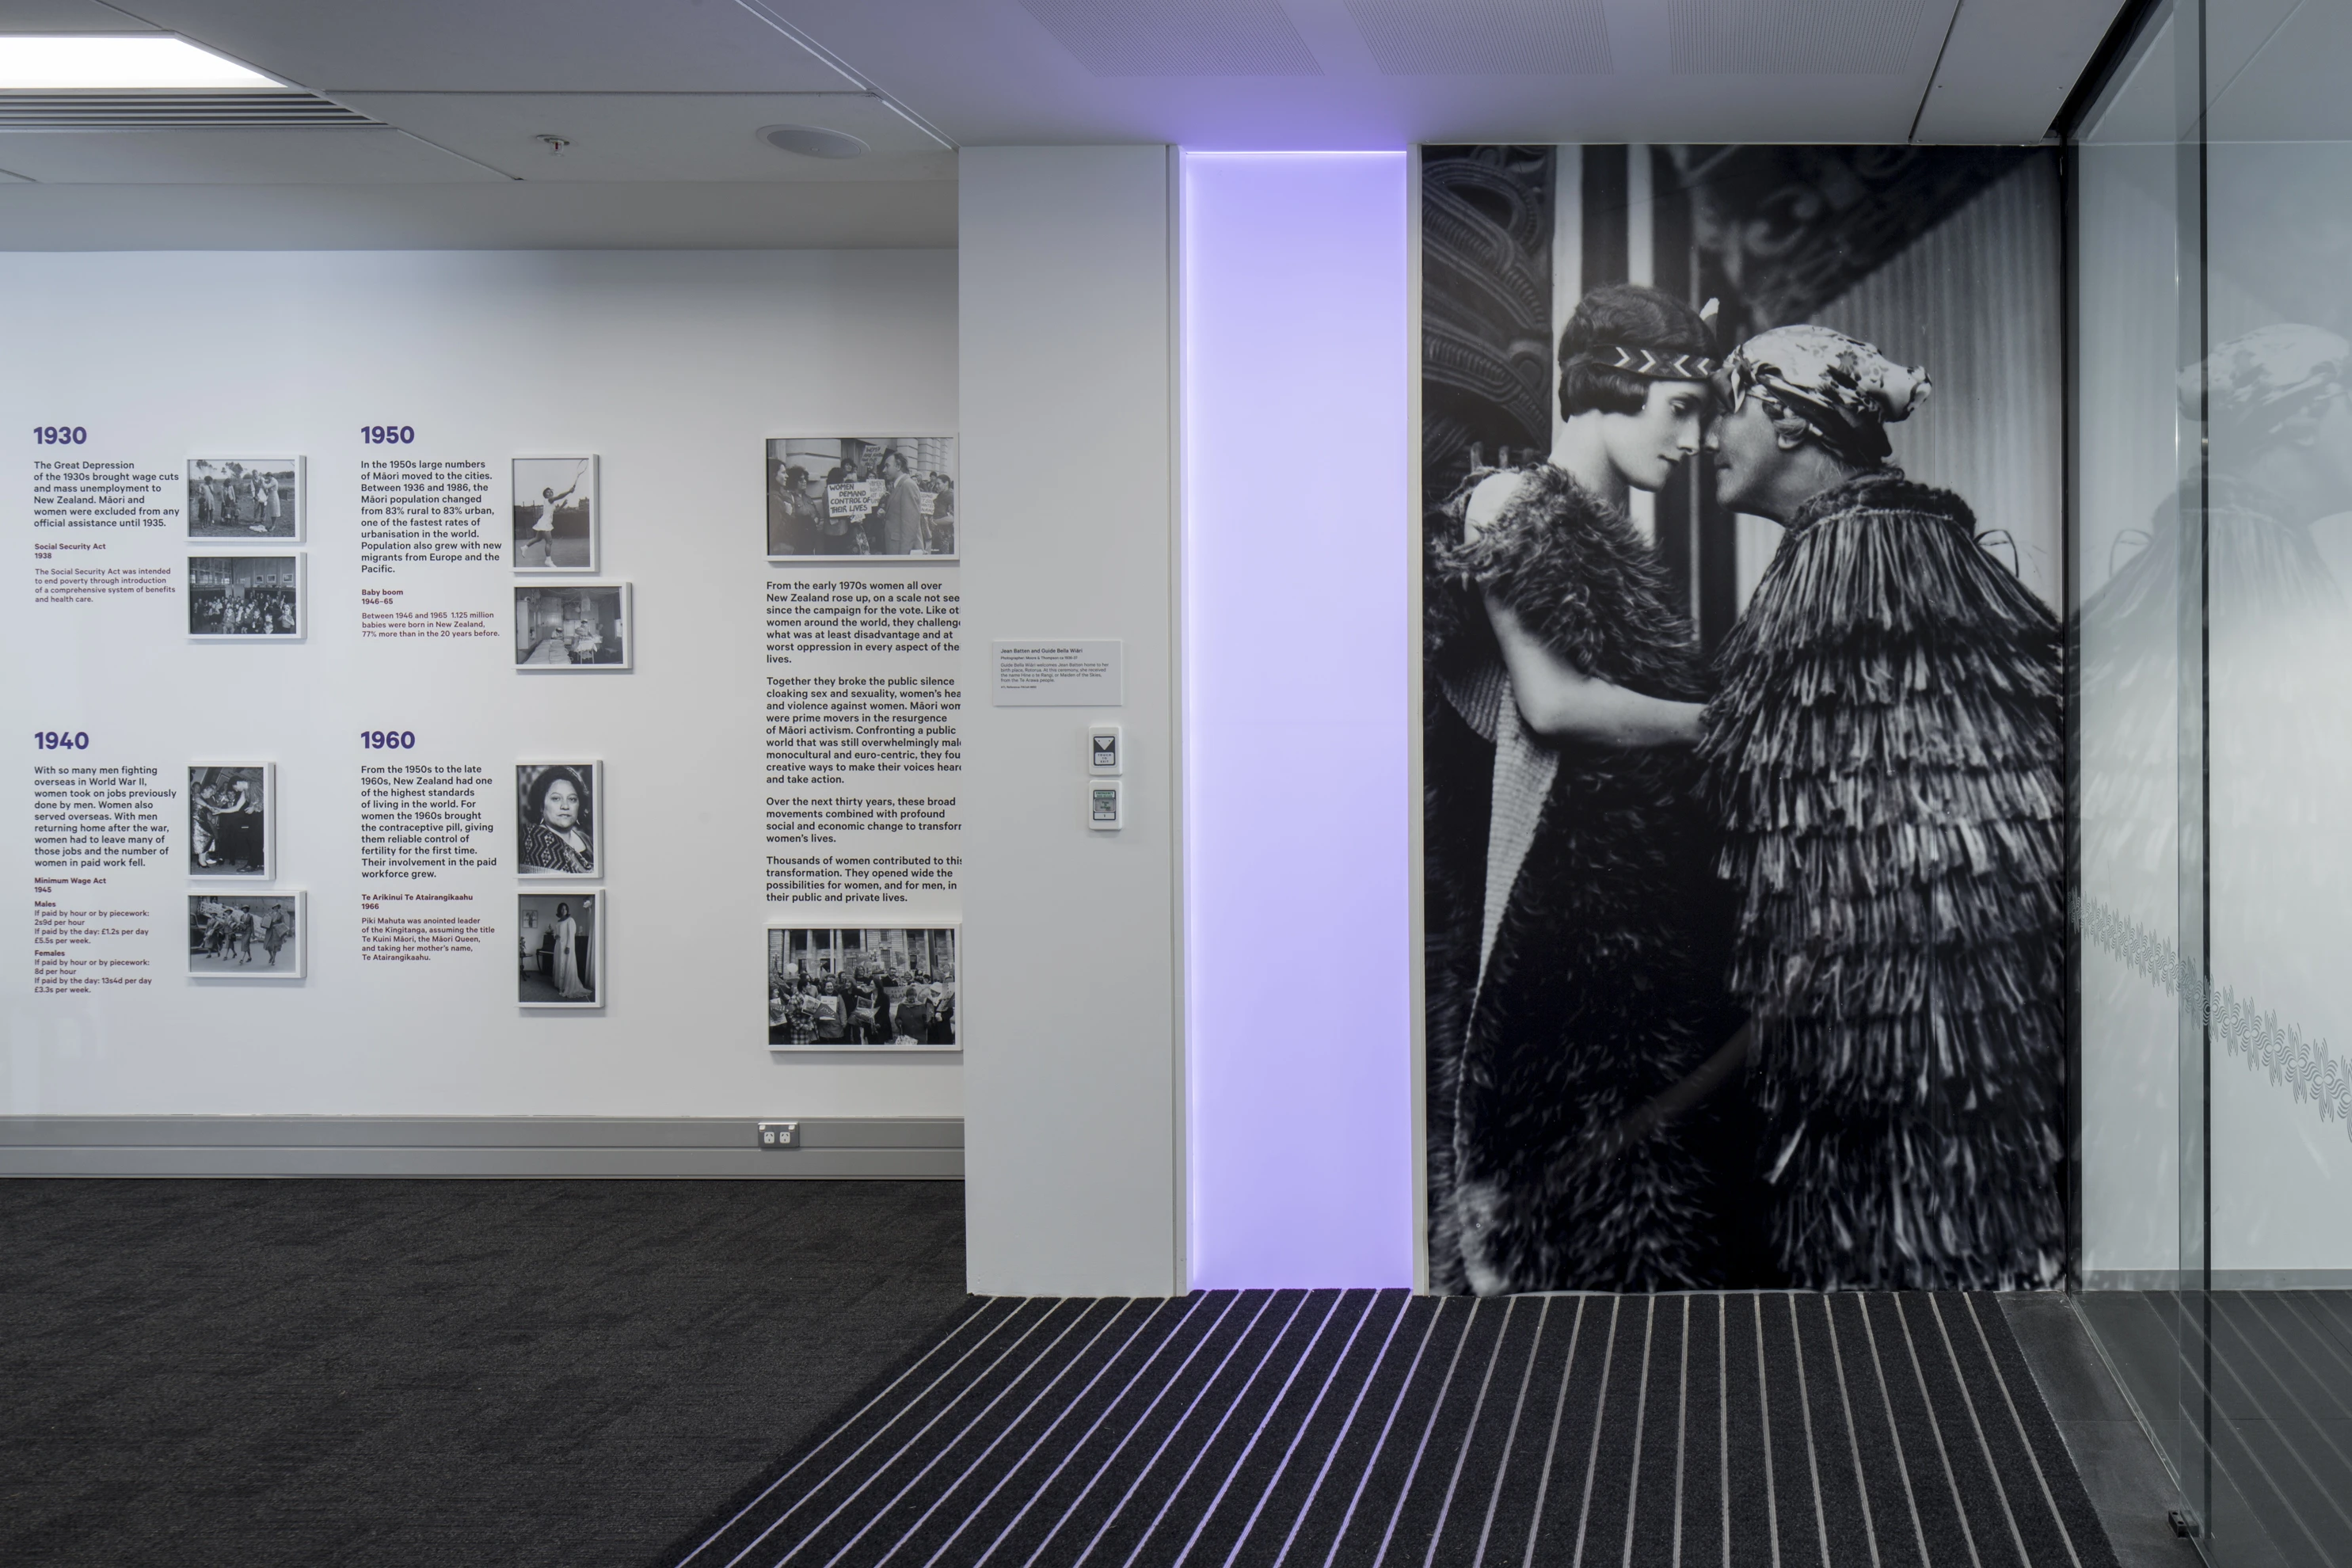 Photograph of an exhibition including a large photograph of Guide Bella greeting Jean Batten.